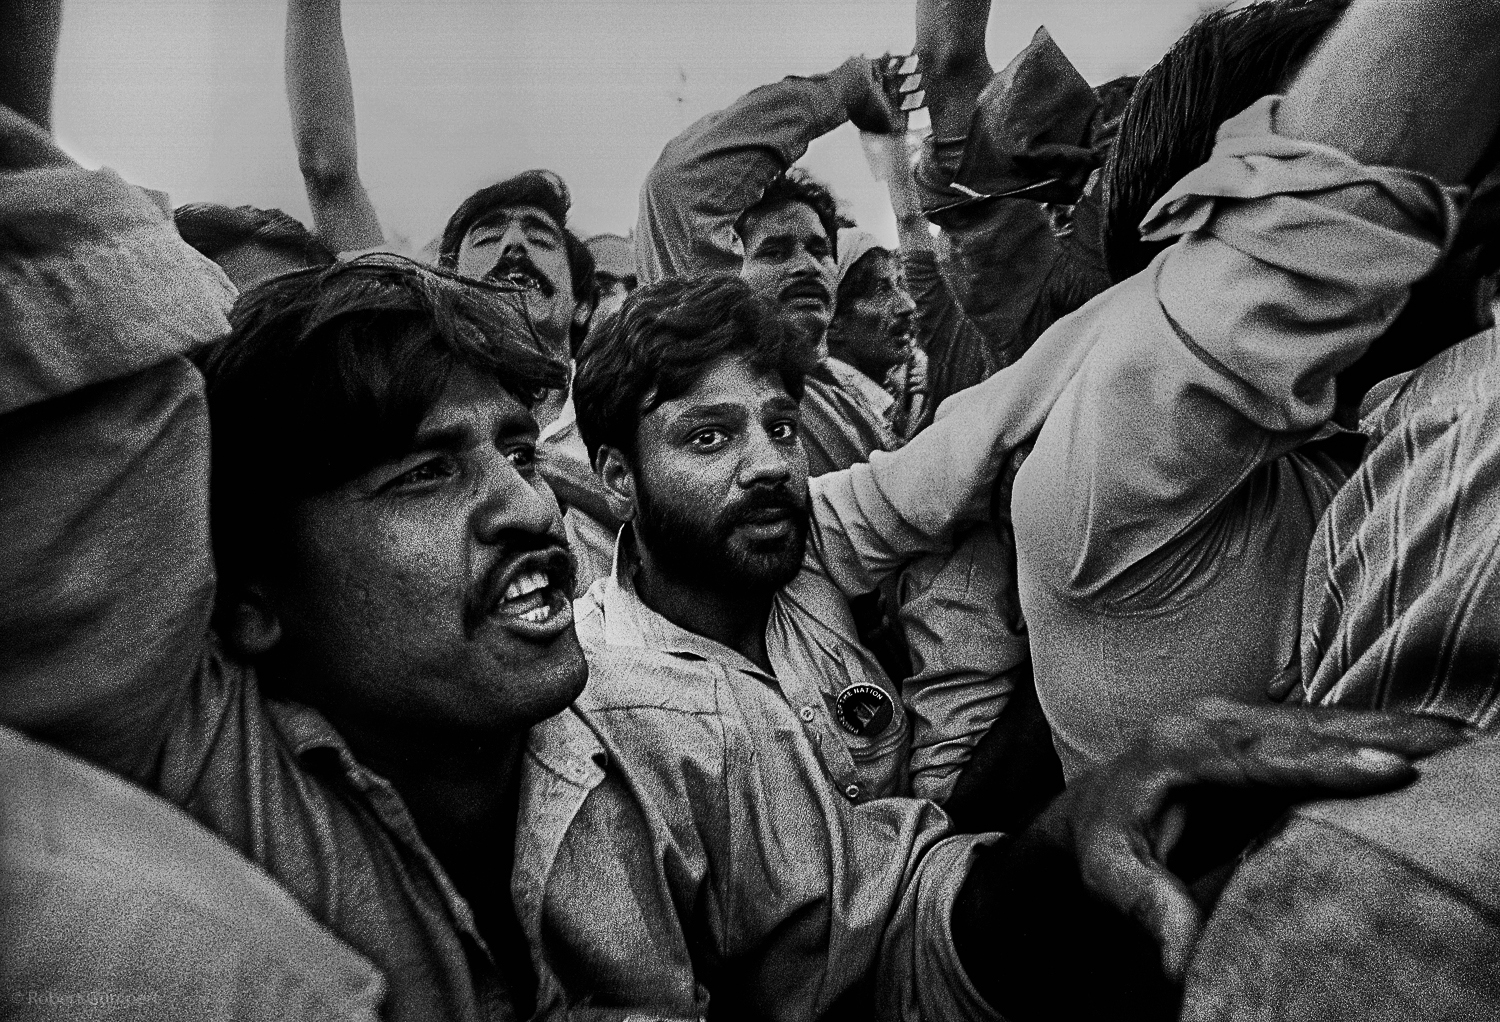  Lahore, Pakistan 1990:  Supporters of a candidate greet him as he arrives in a car carvan. 